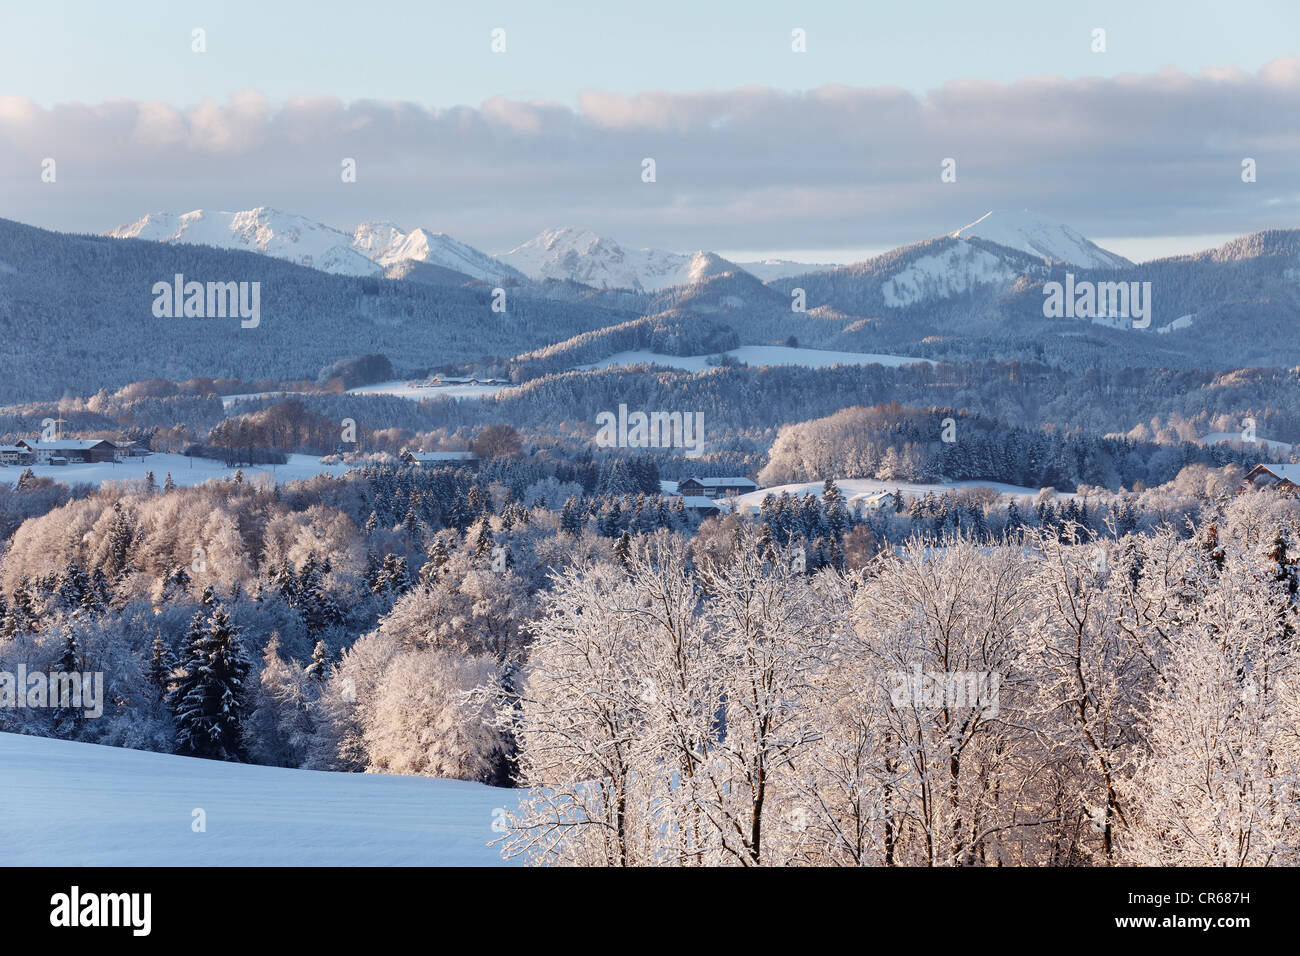 Germany, Bavaria, View of alpine foothills with Mangfallgebirge mountains in background Stock Photo